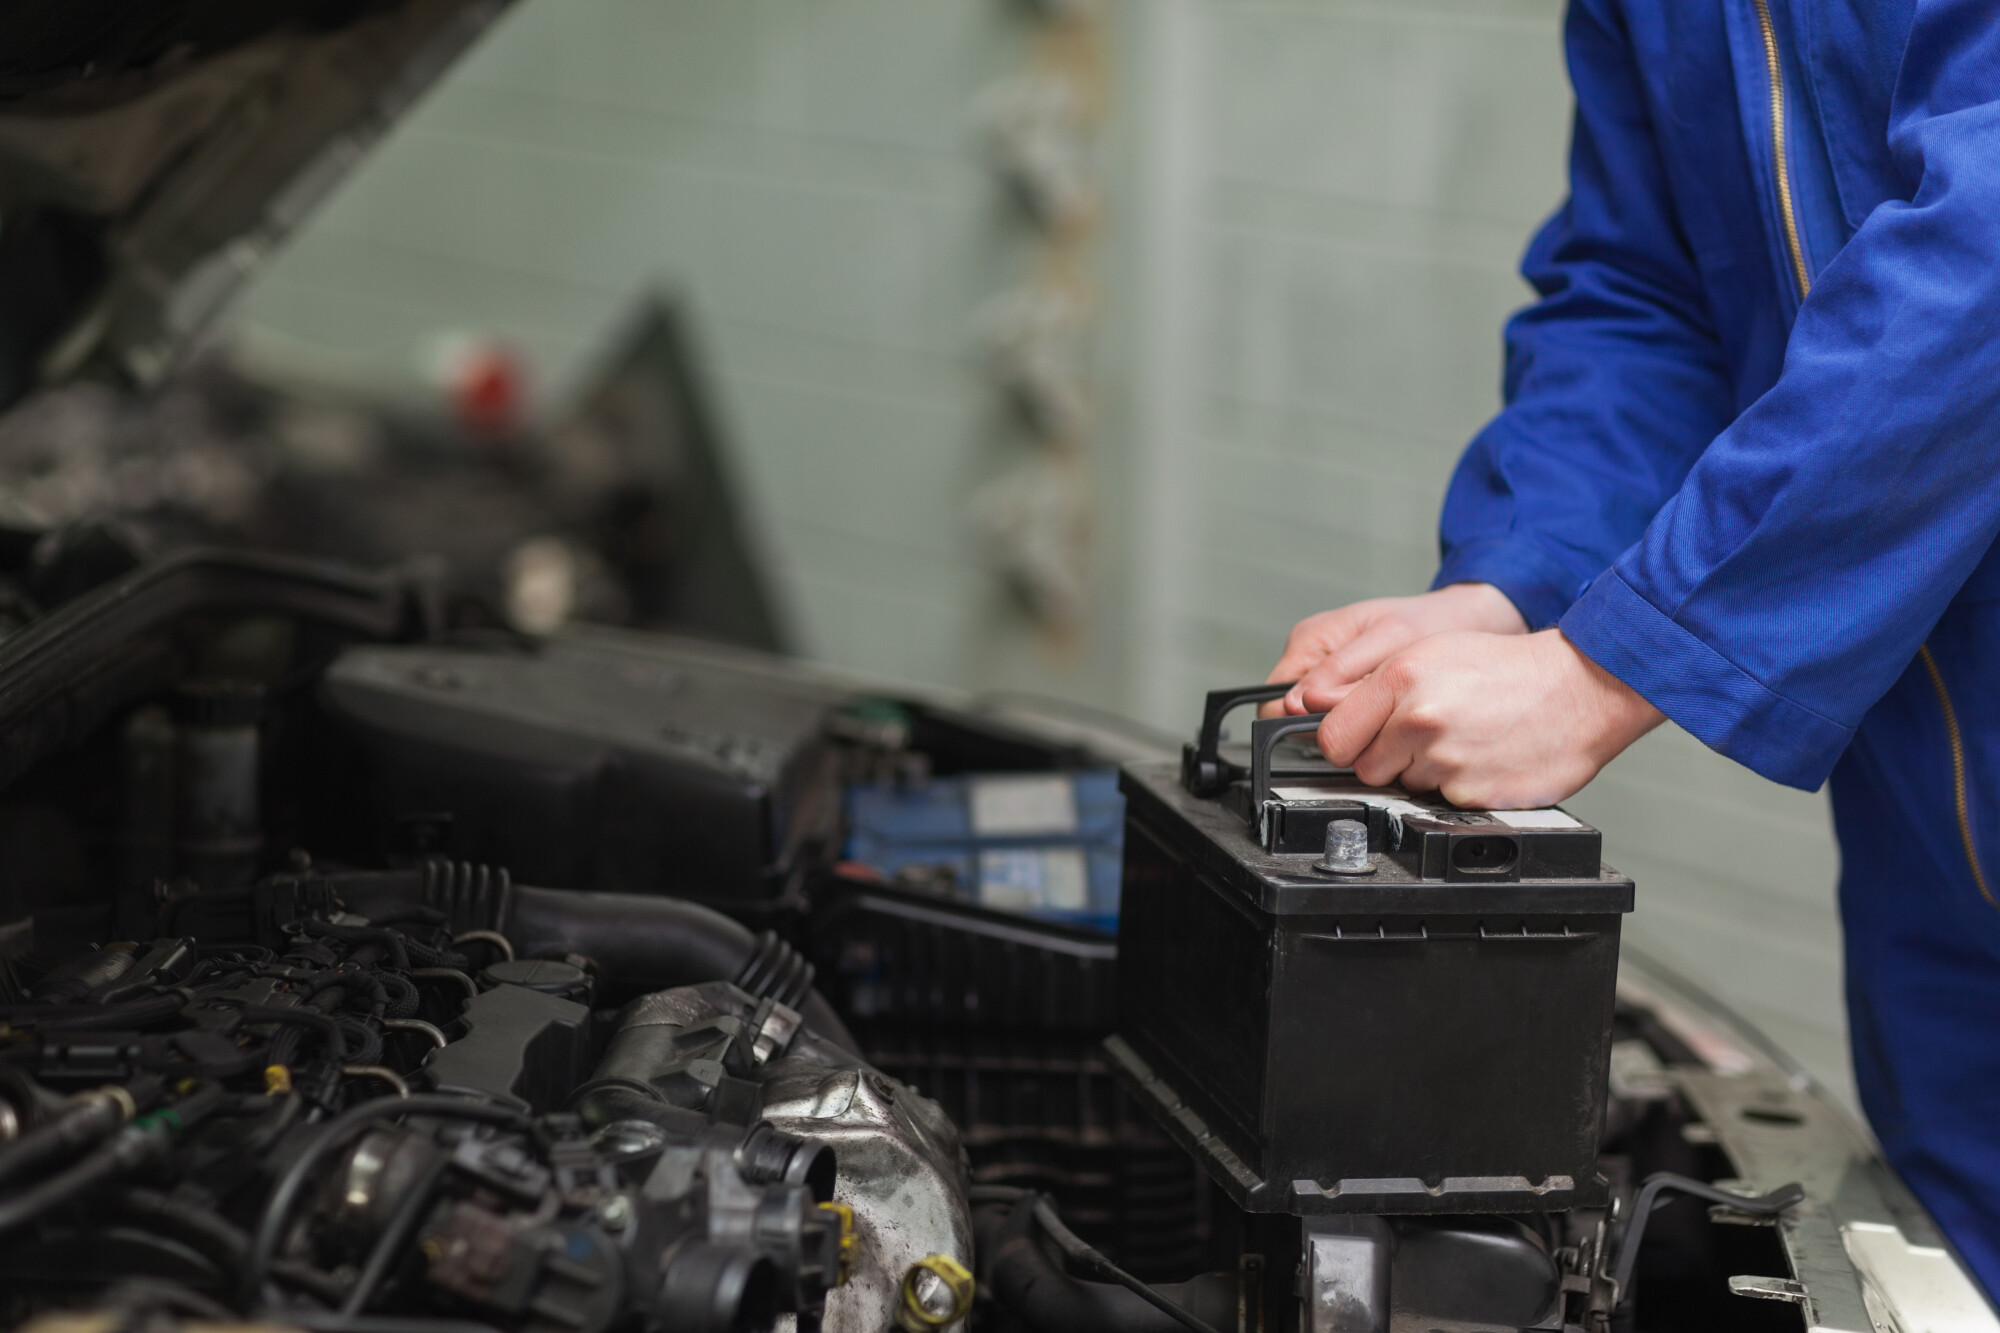 Change a Car Battery Safely